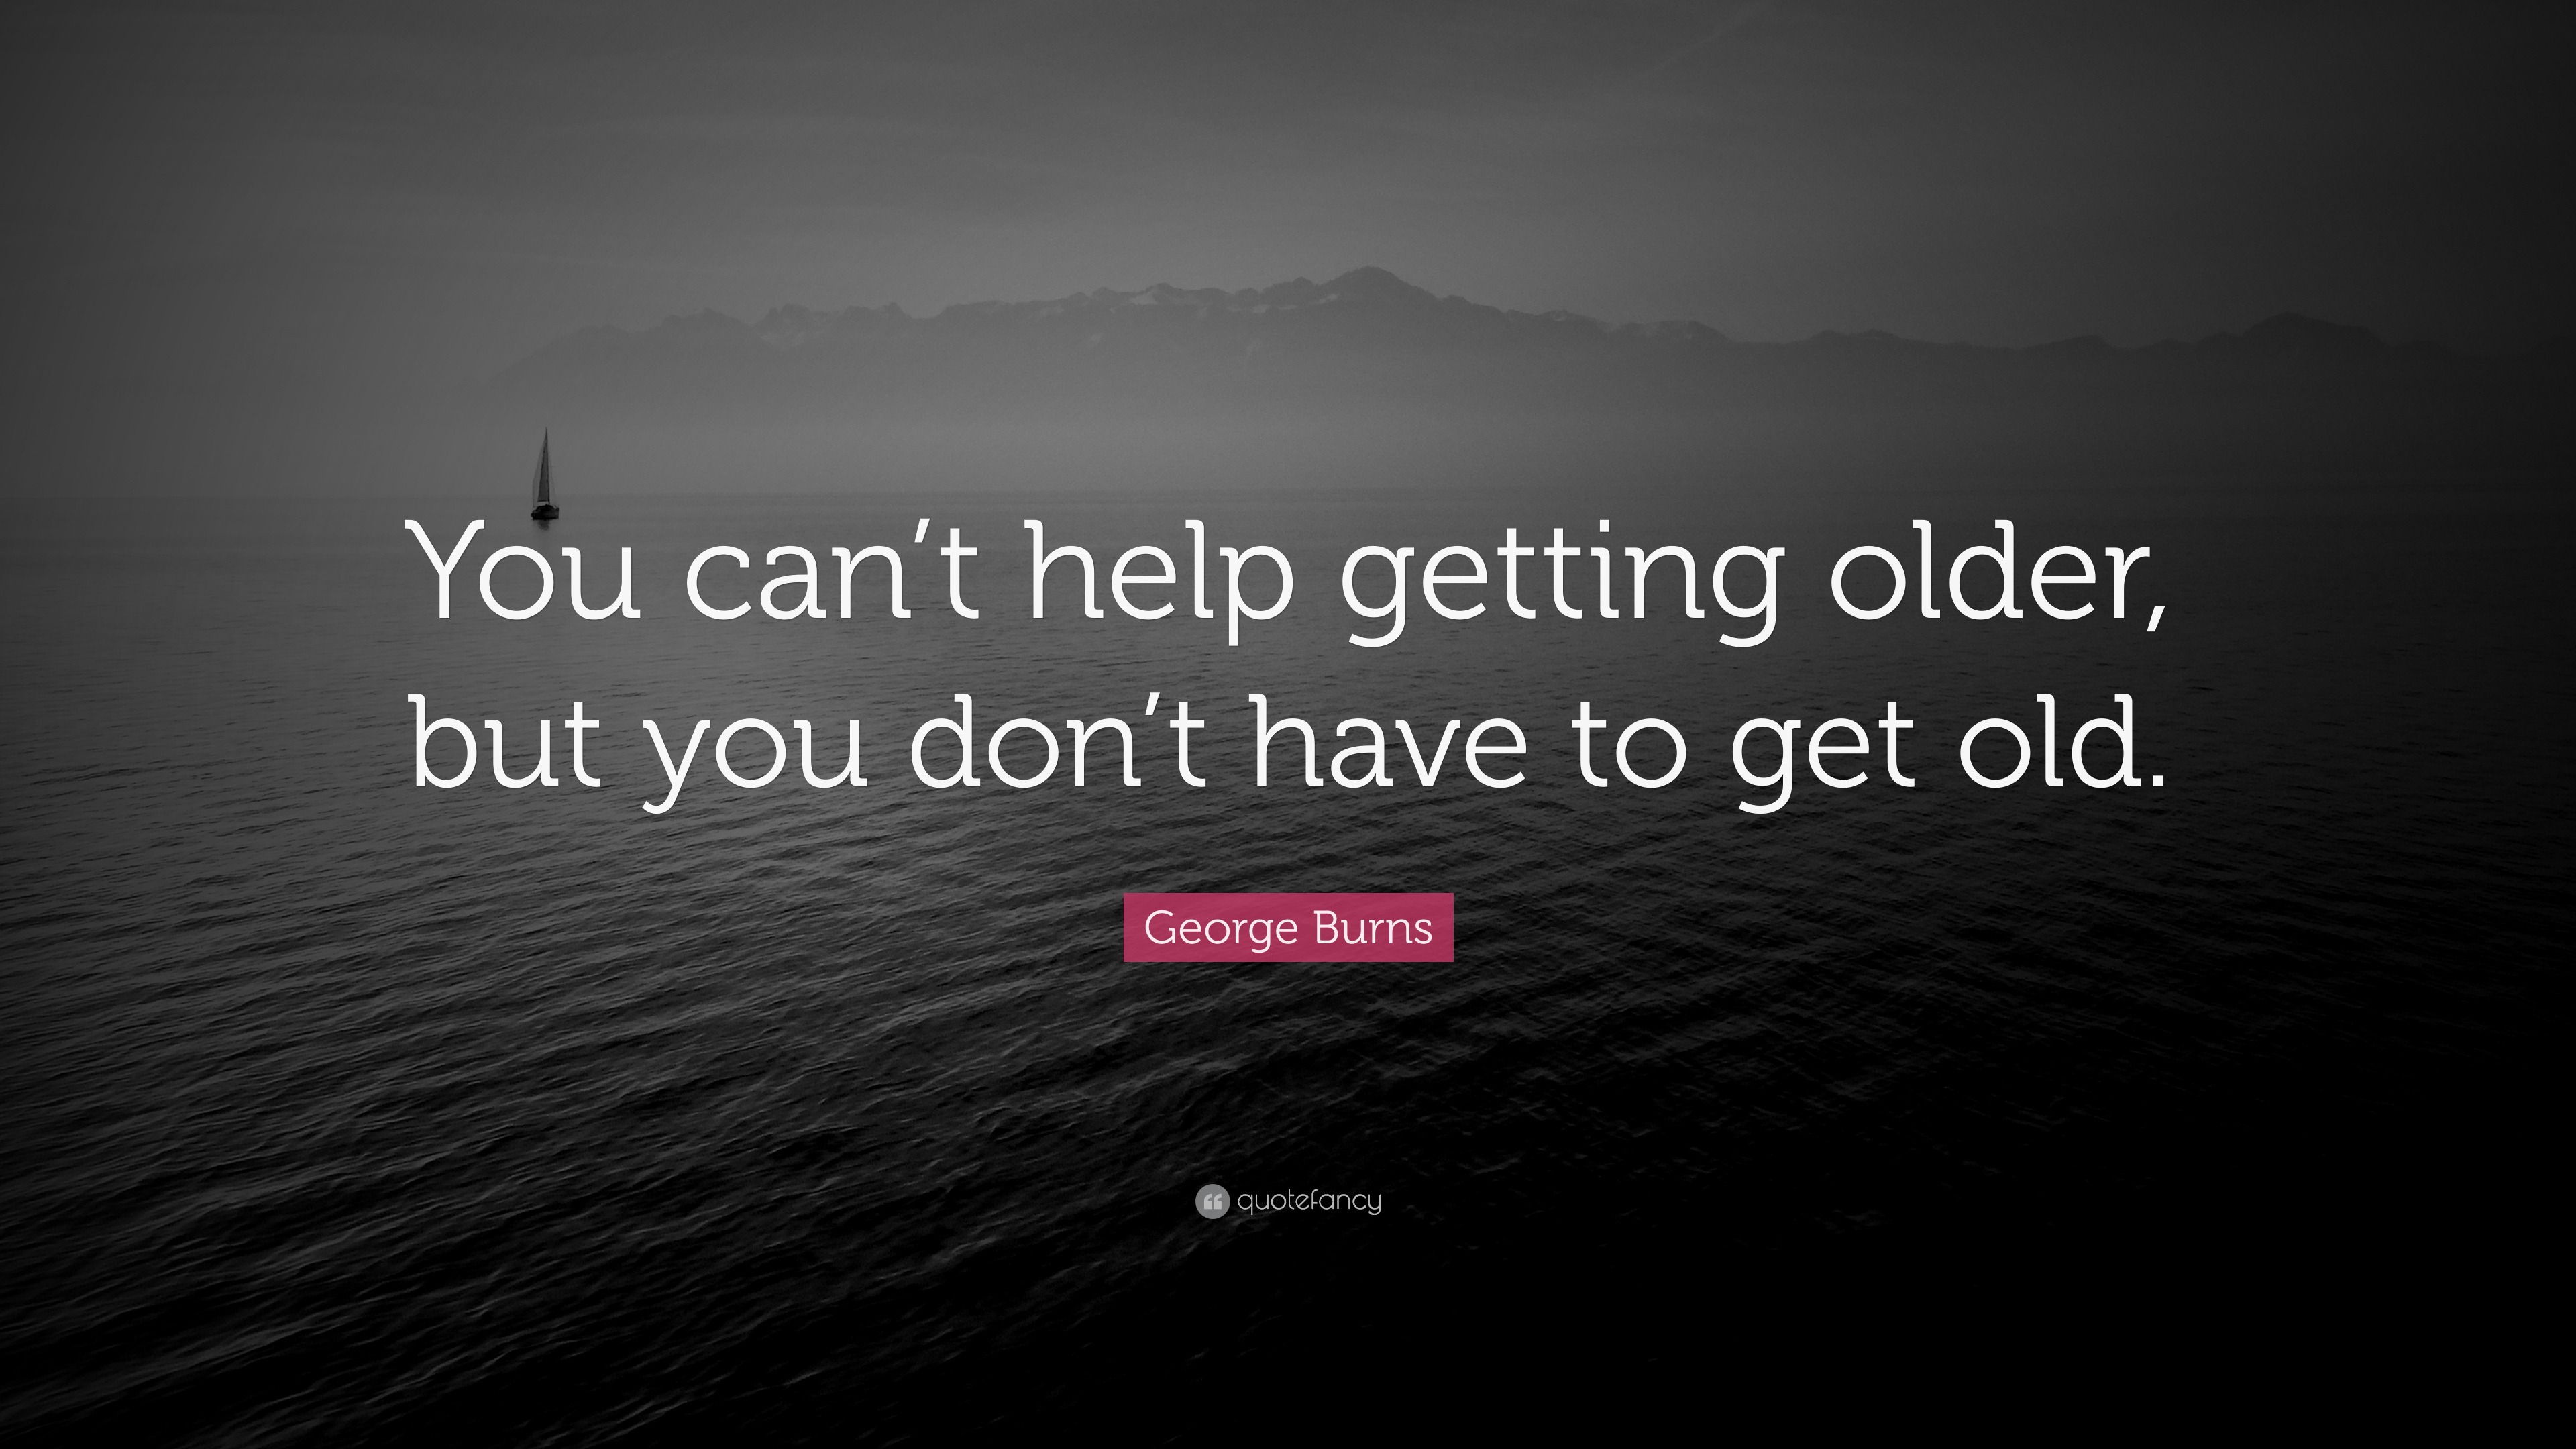 Burns Quote “You can’t help getting older, but you